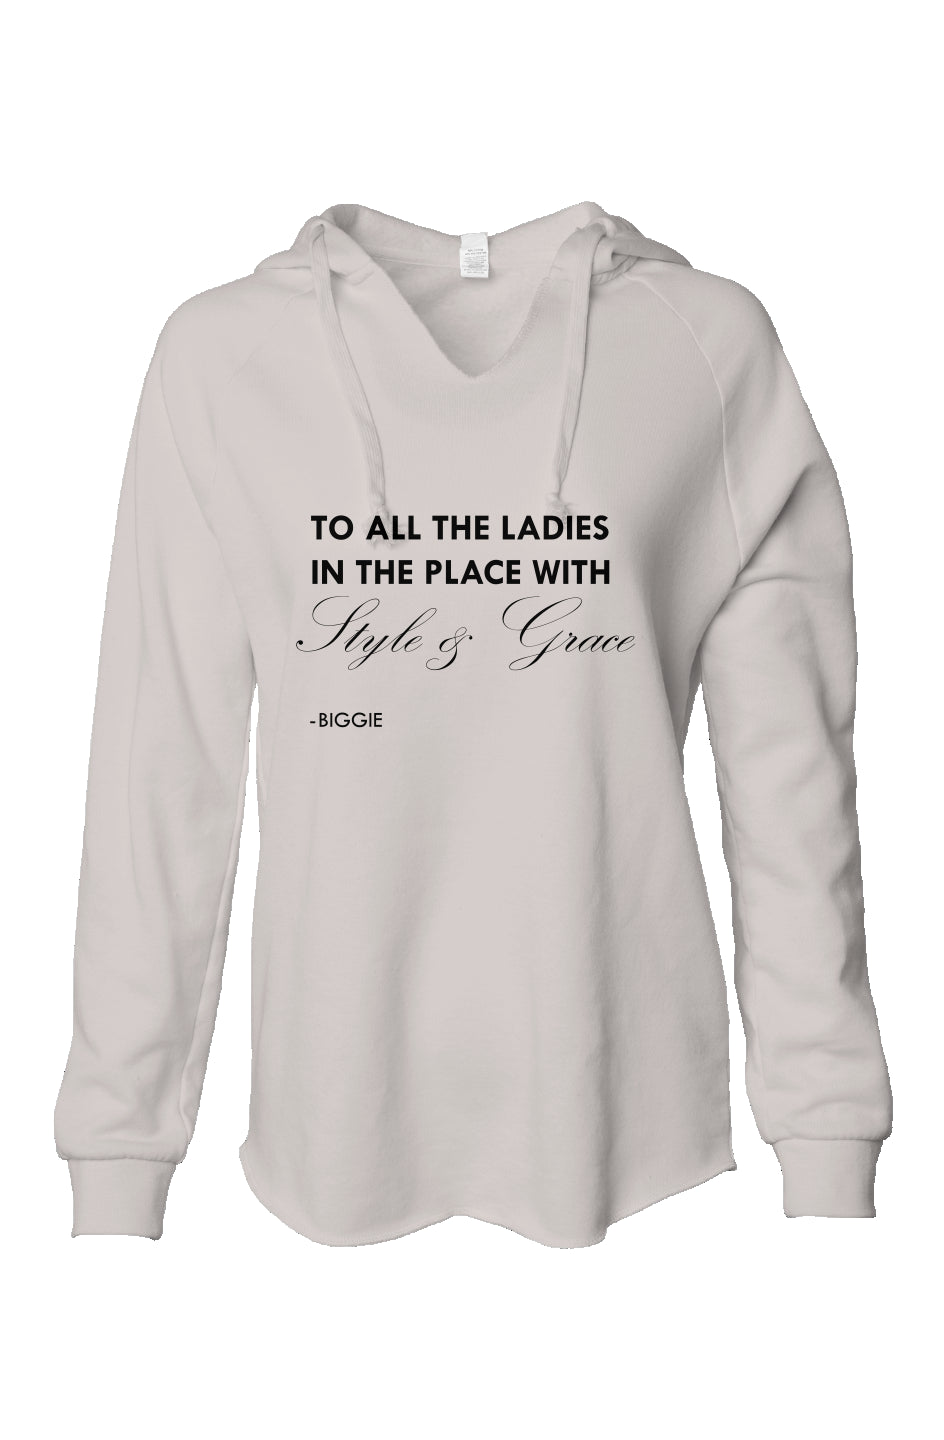 Style & Grace Womens Wave Wash Hoodie